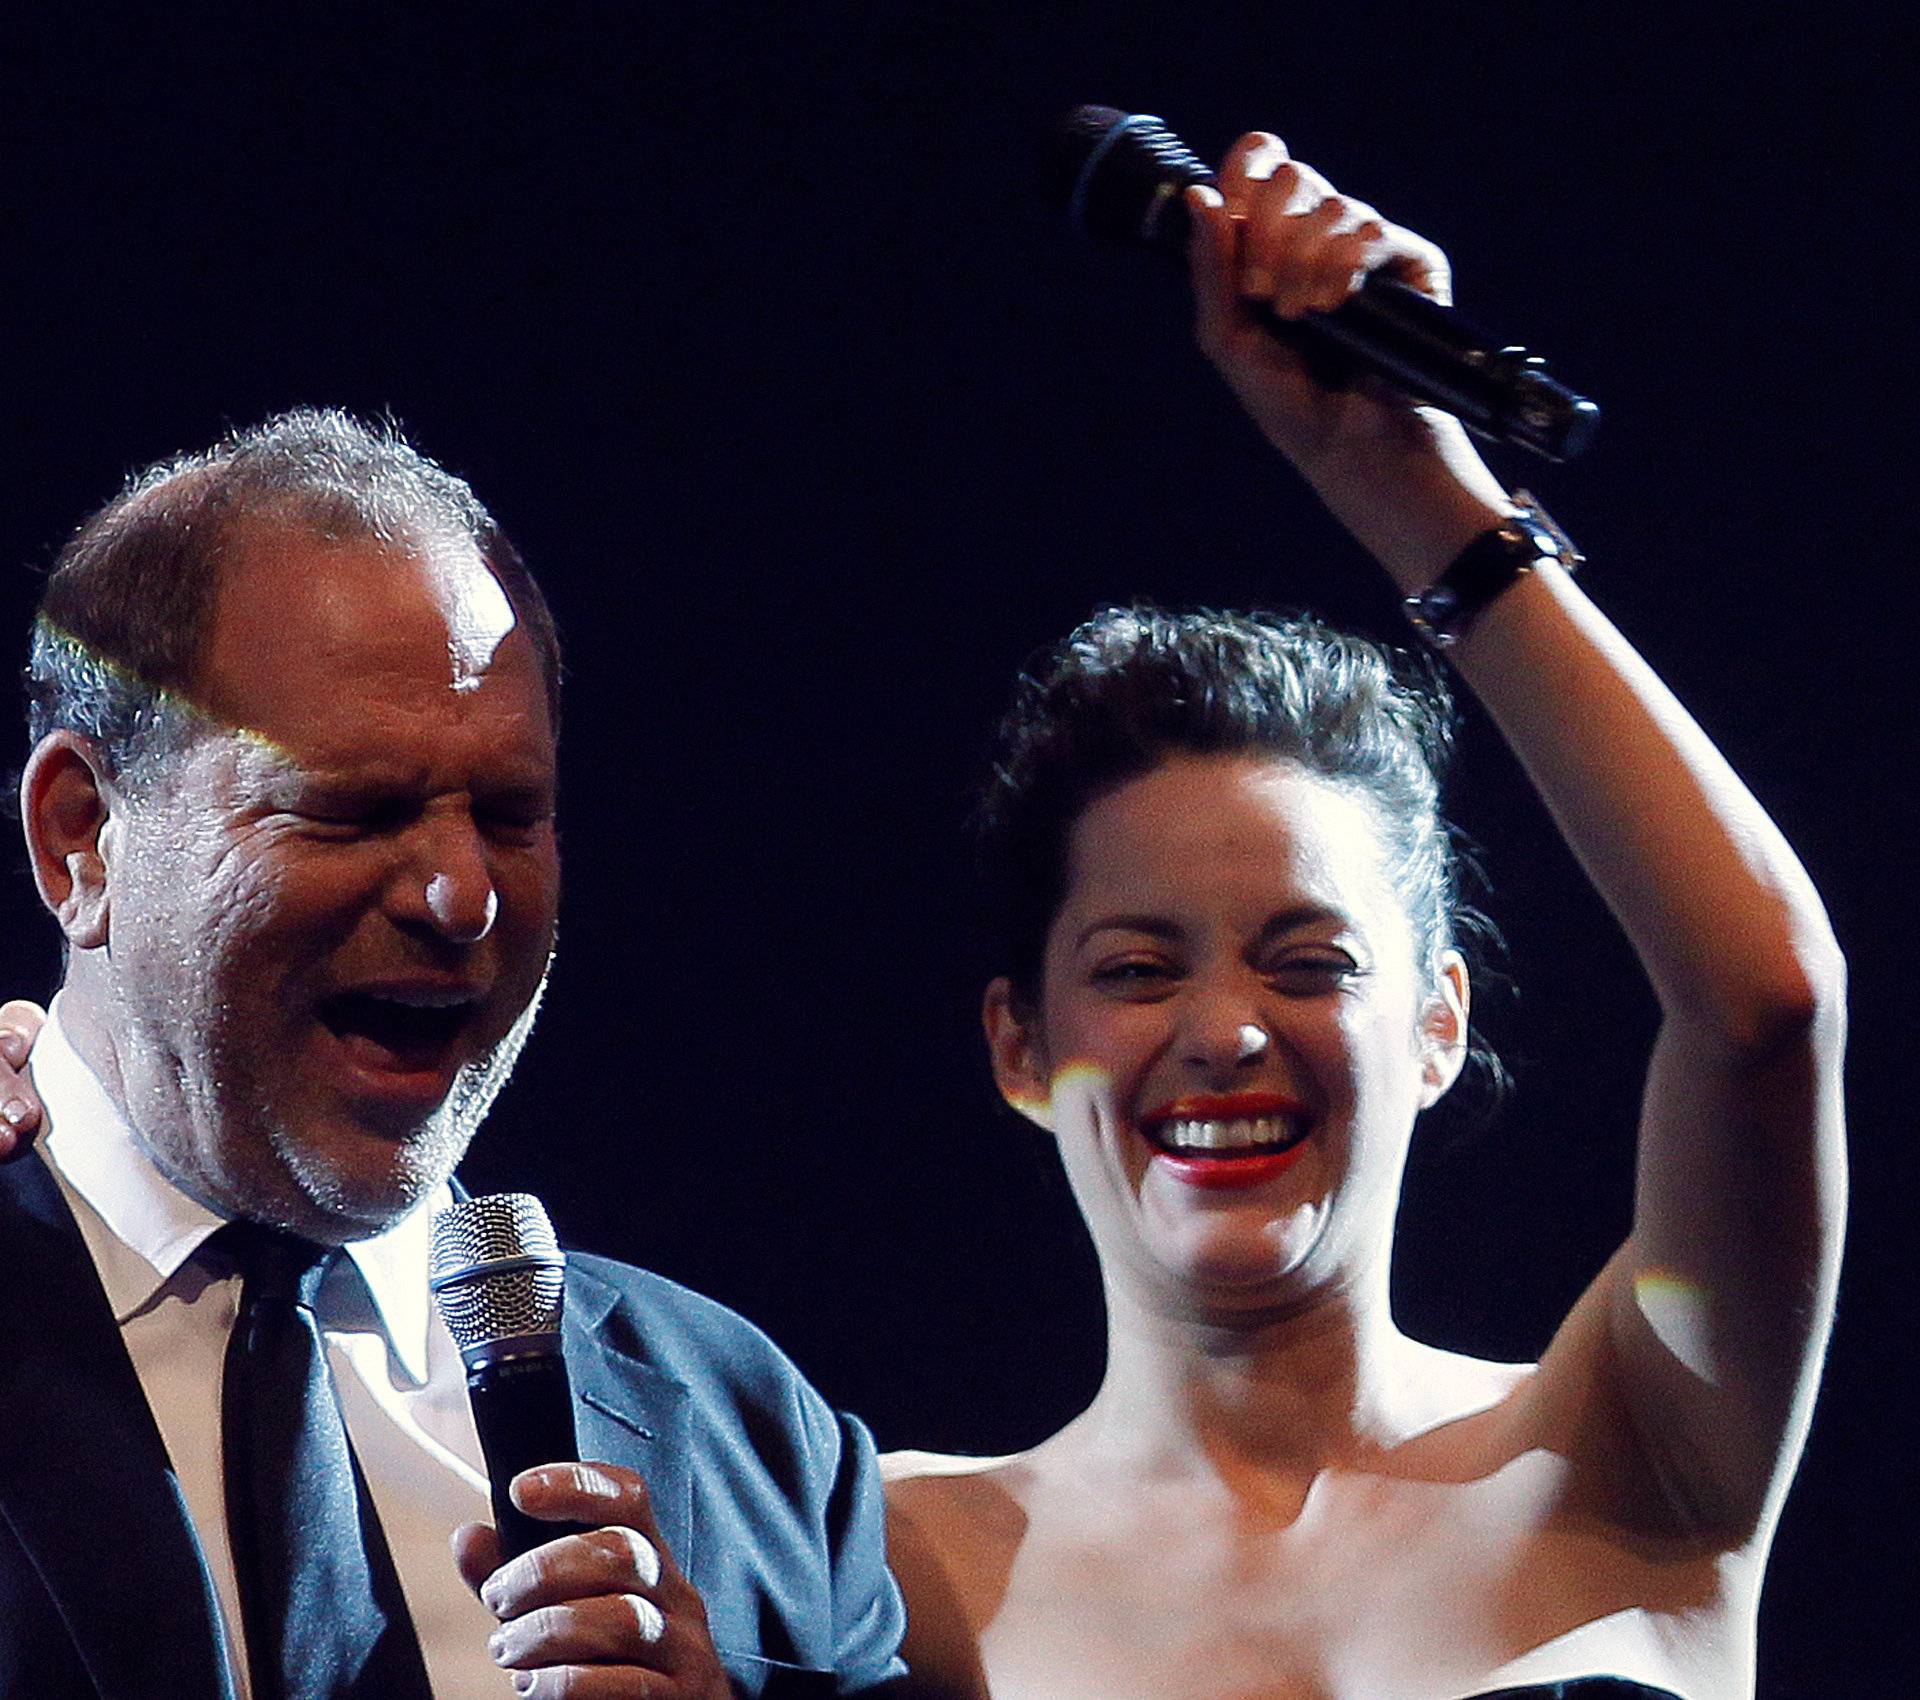 FILE PHOTO: Actress Cotillard and producer Weinstein lead an auction at the amfAR's Cinema Against AIDS 2010 event in Antibes